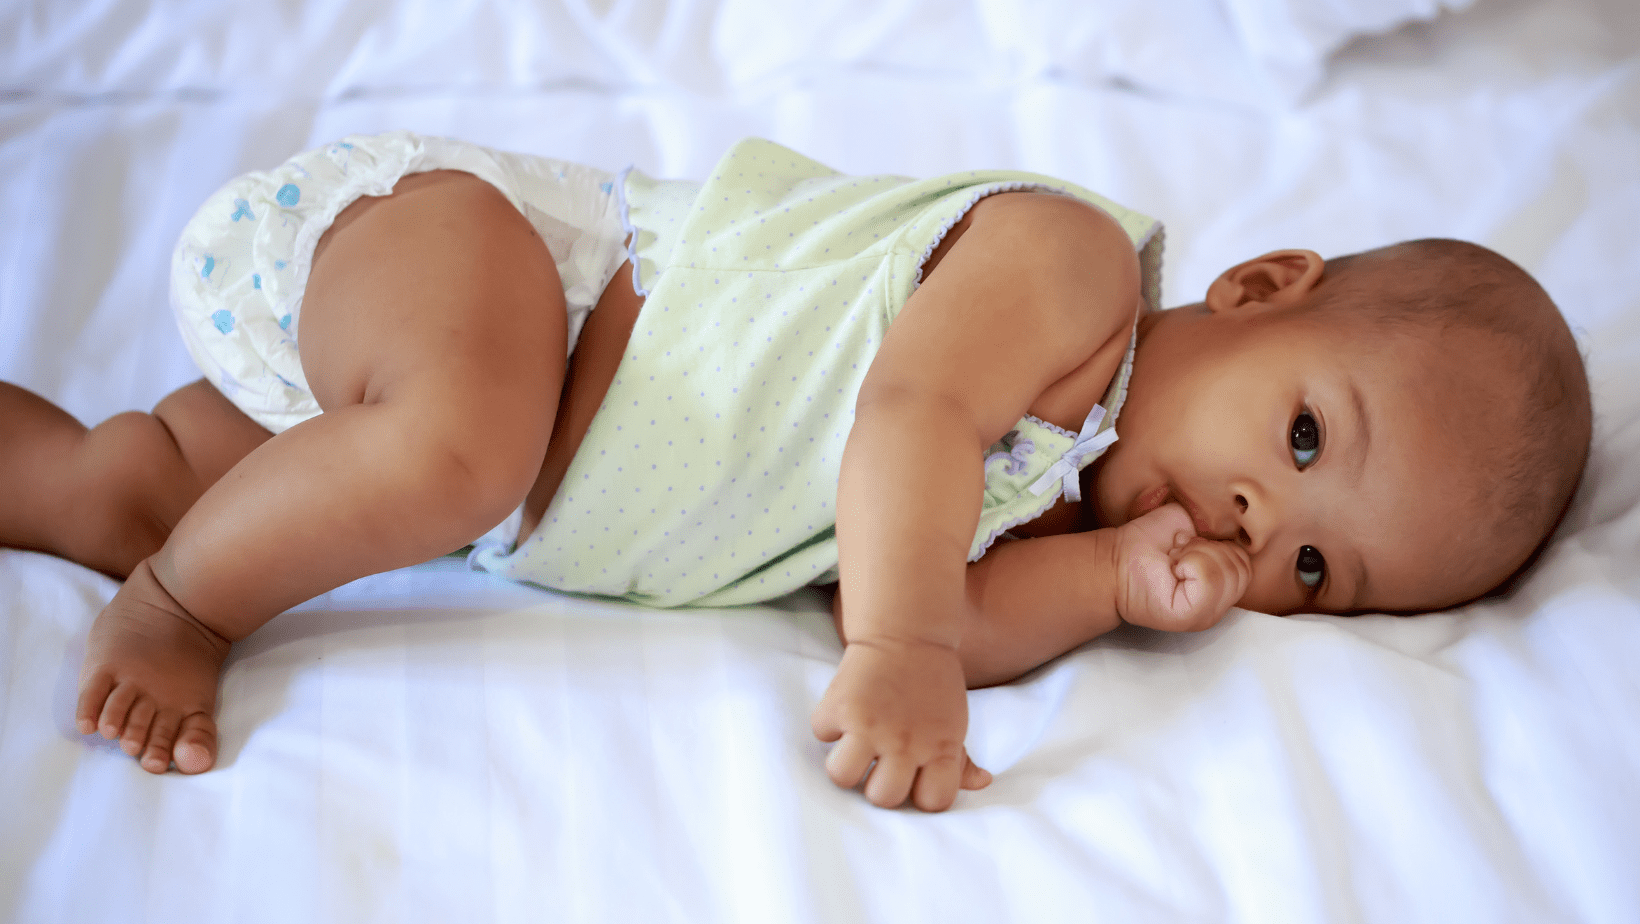 6 Reasons Why a Baby Humps + What to Do About It - Coping with Lindsey